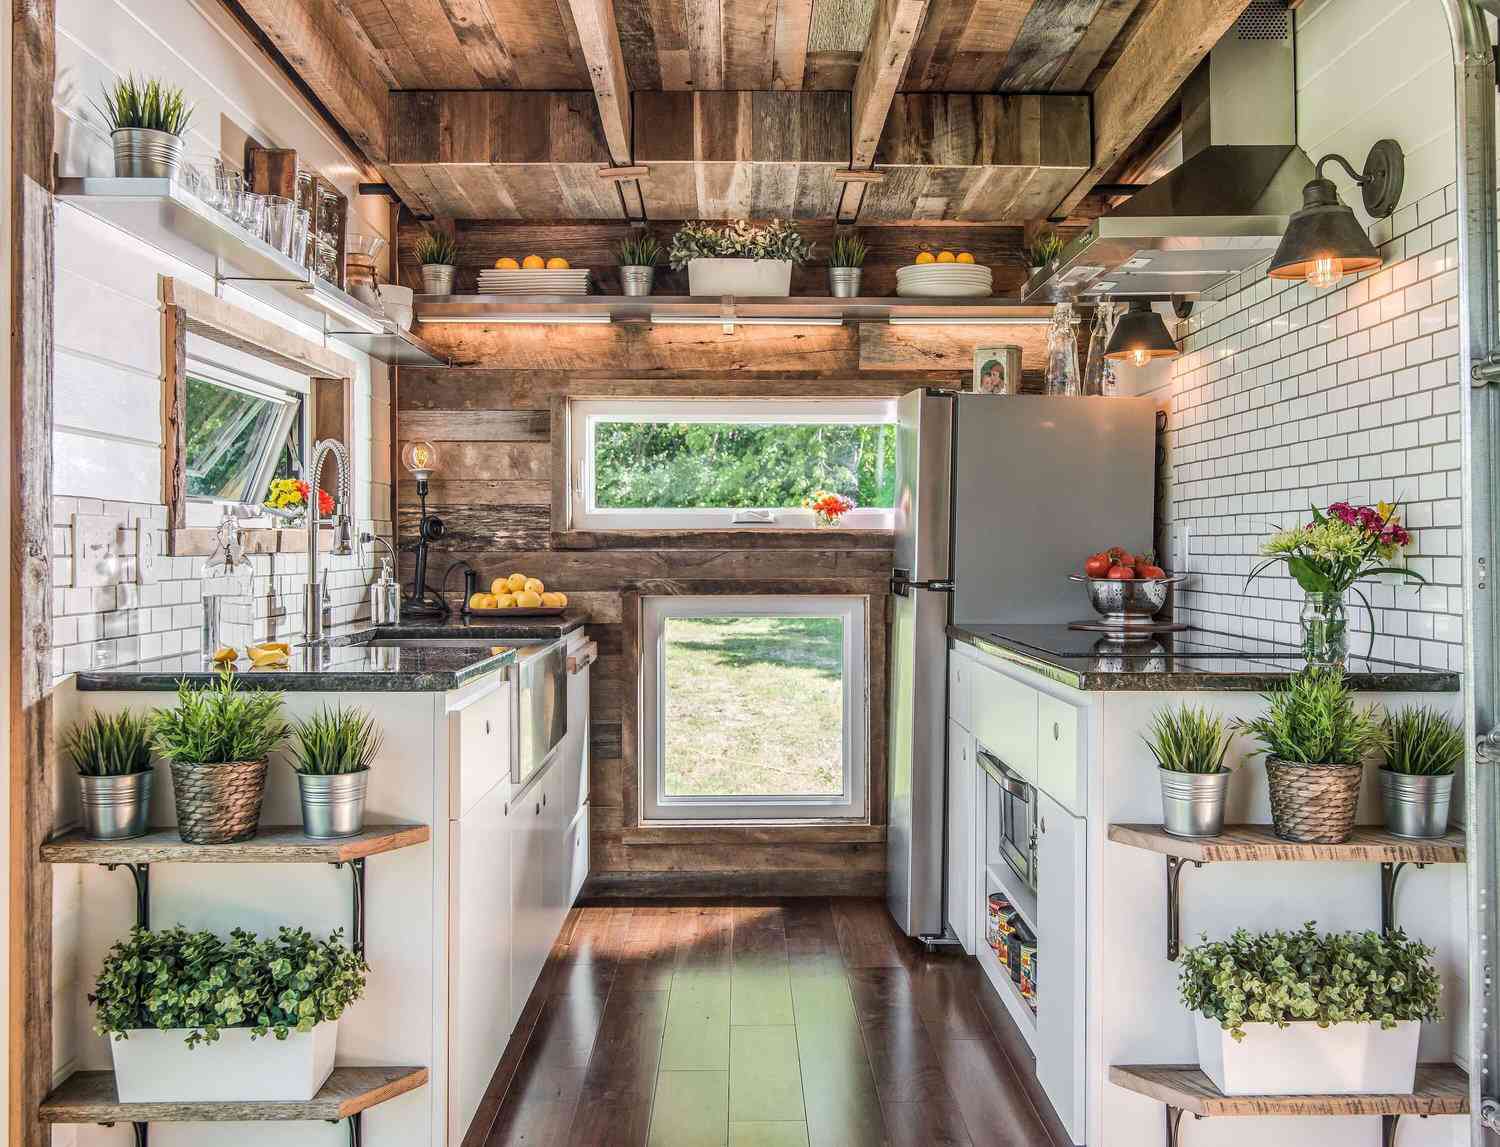 Tiny kitchen with full-sized appliances